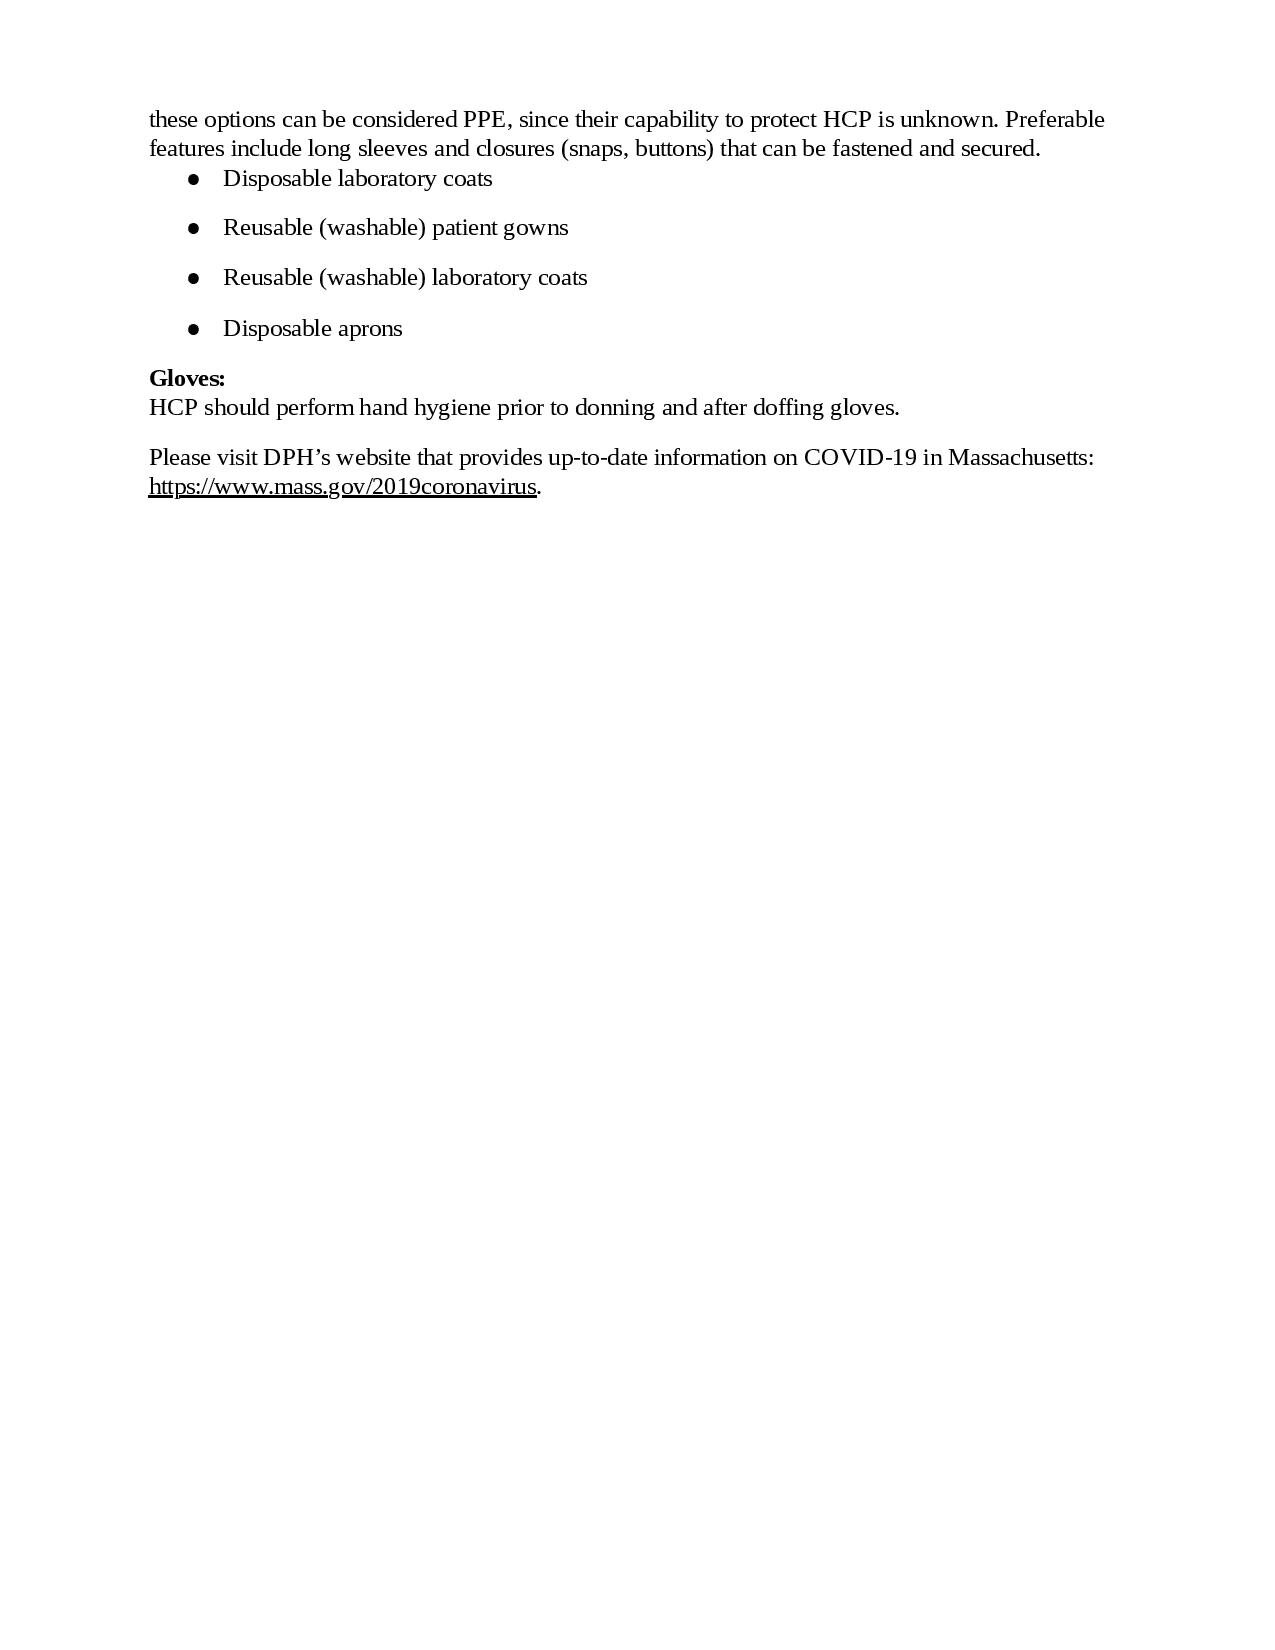 Comprehensive-PPE-Guidance-7.6.20-page-005.jpg